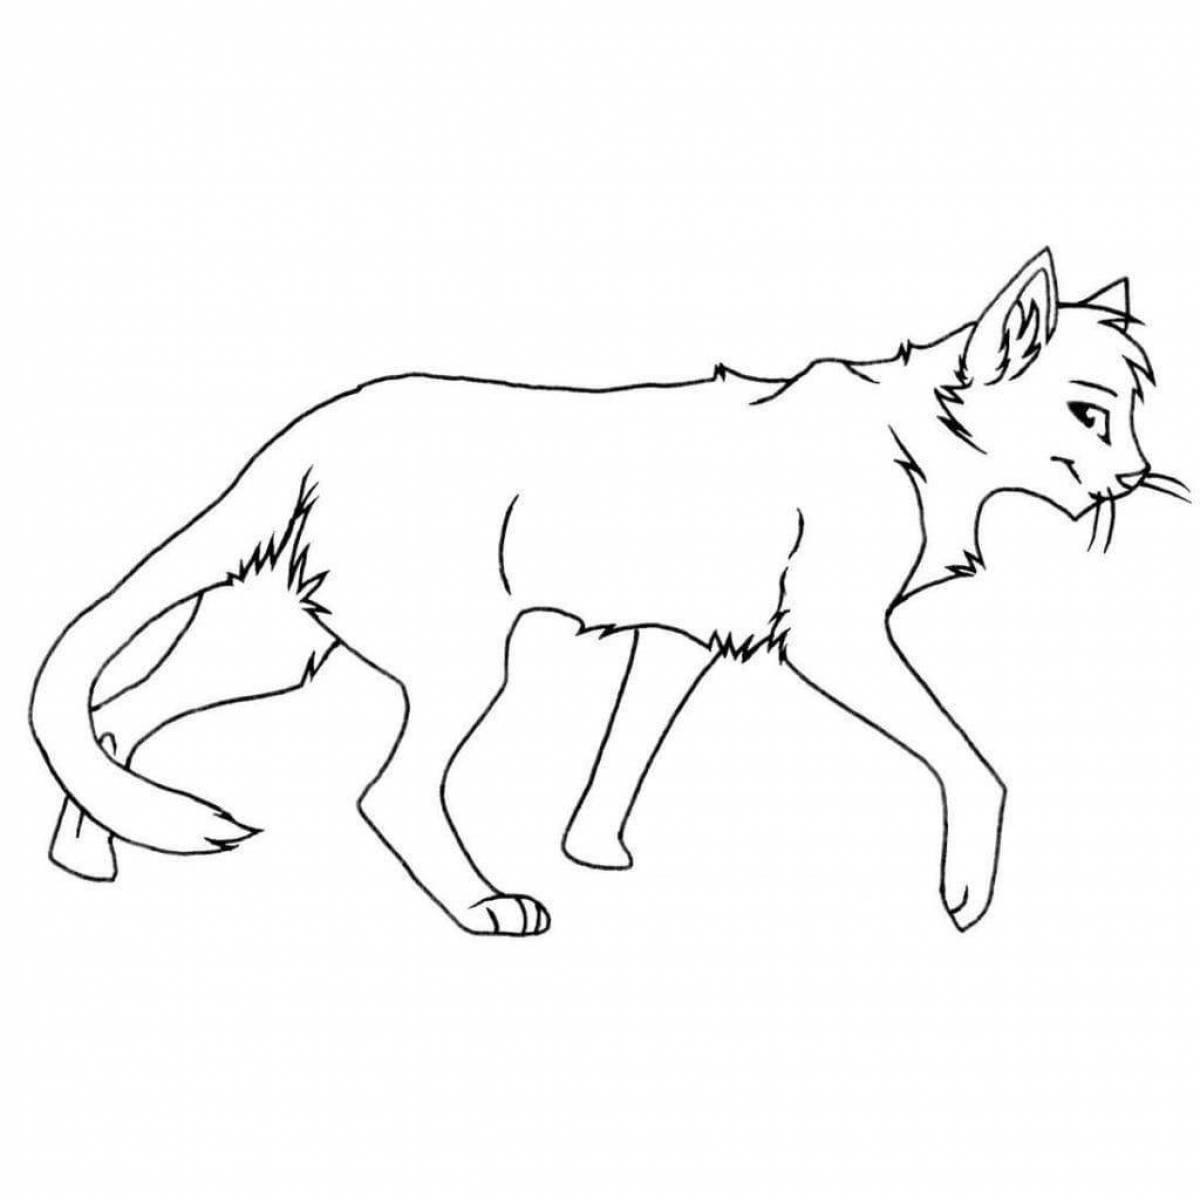 Courageous death warrior cats coloring pages